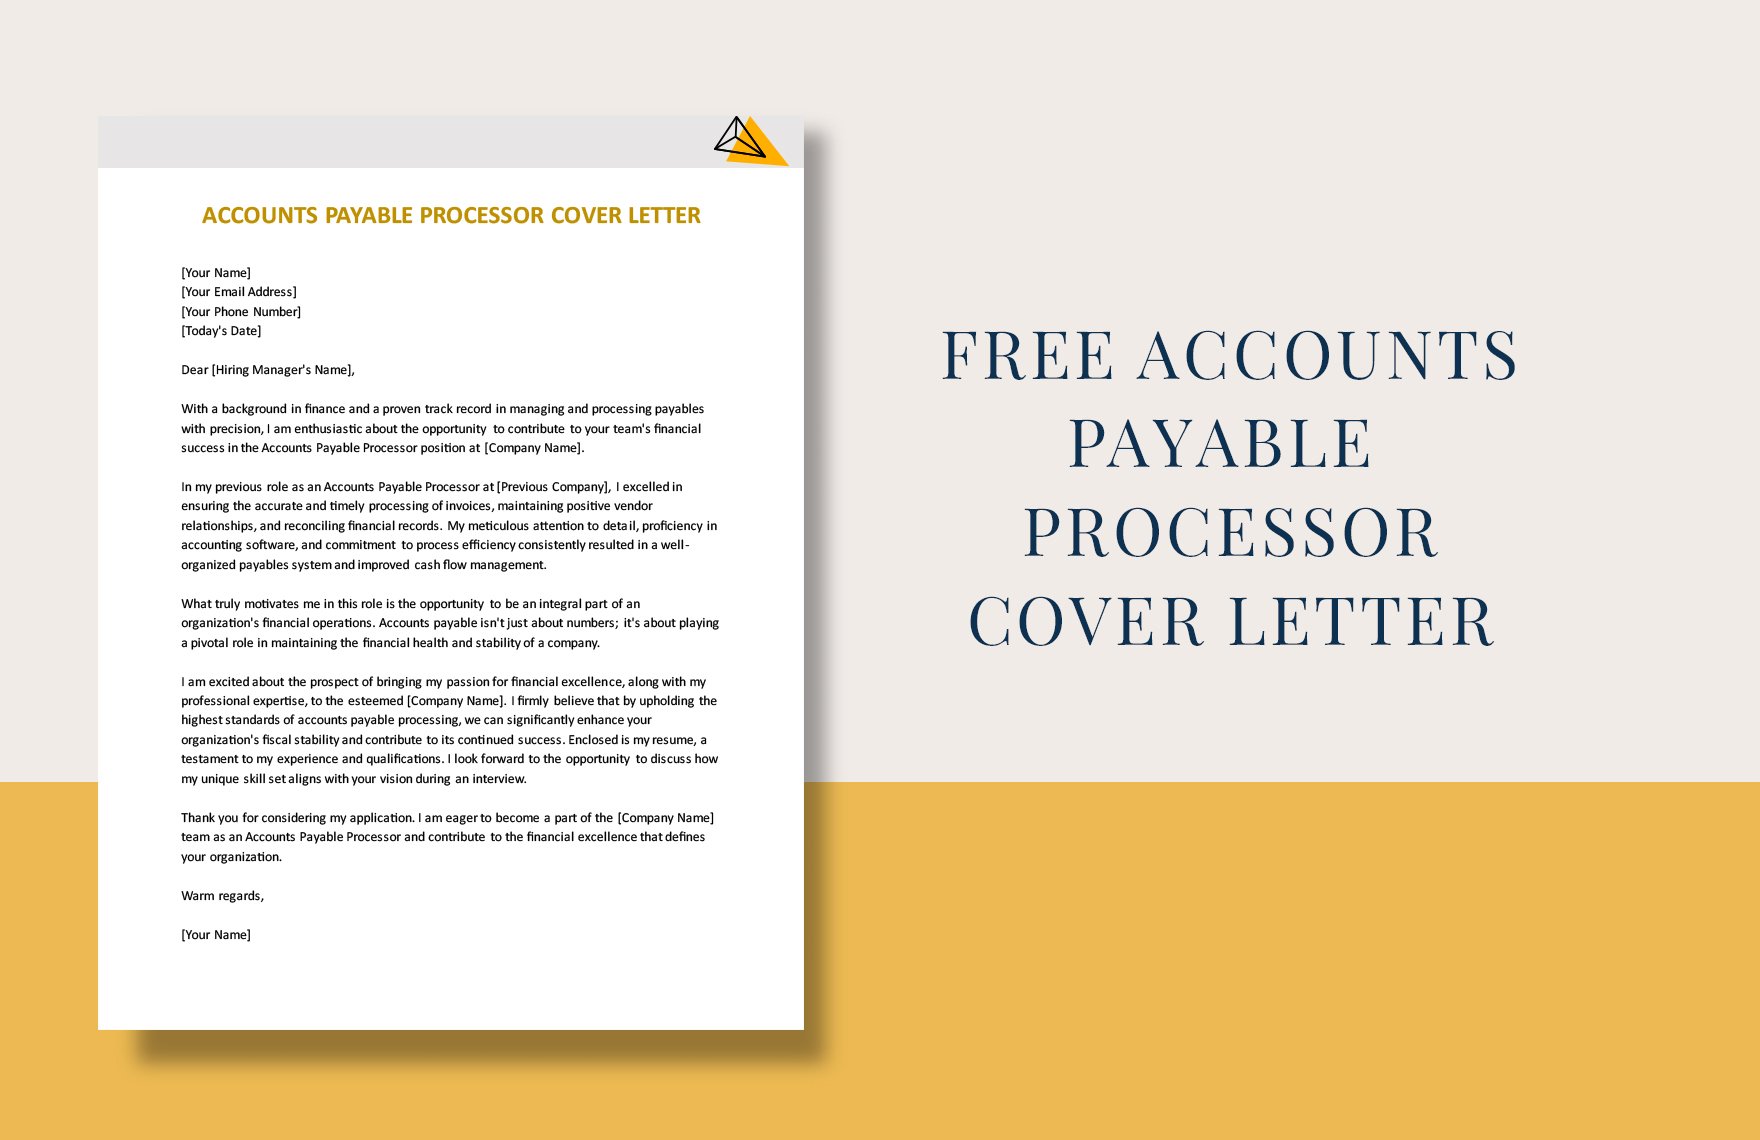 Accounts Payable Processor Cover Letter in Word, Google Docs, PDF